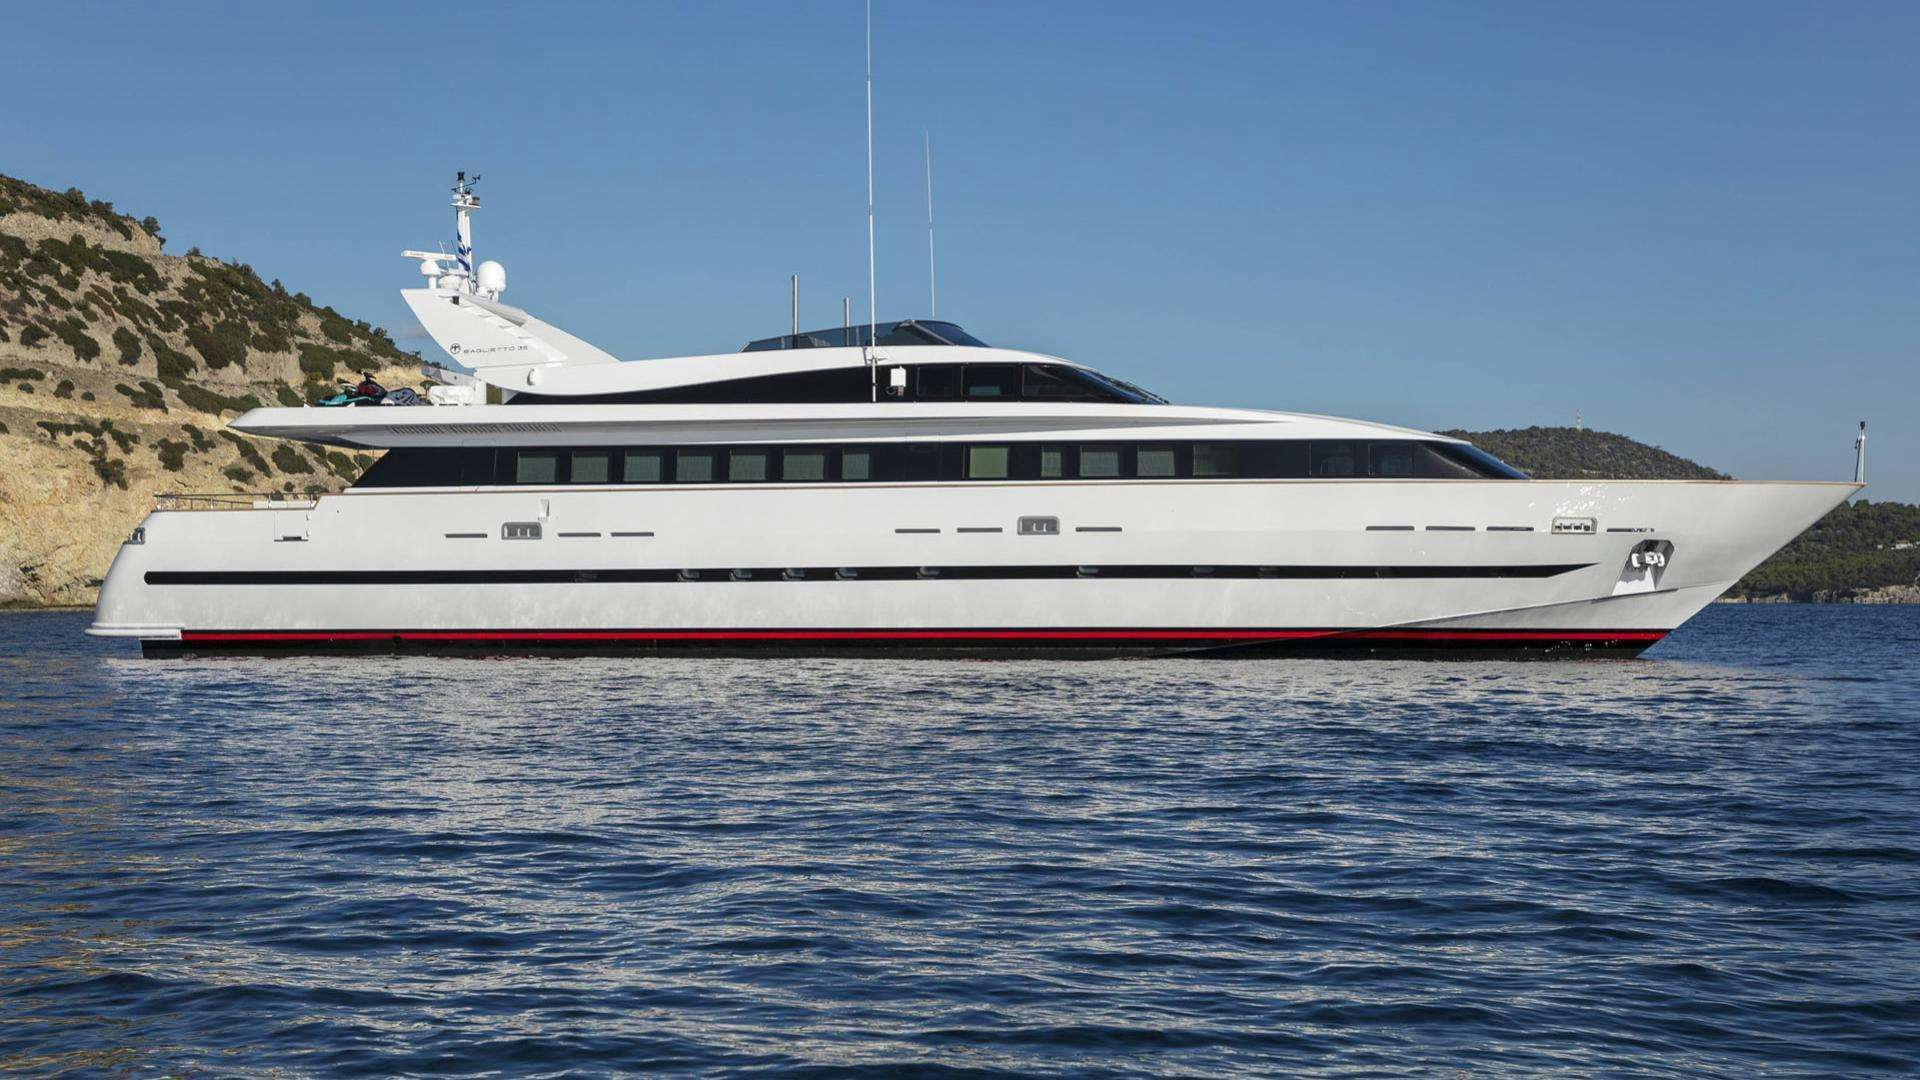 Watch Video for SOLE DI MARE Yacht for Charter